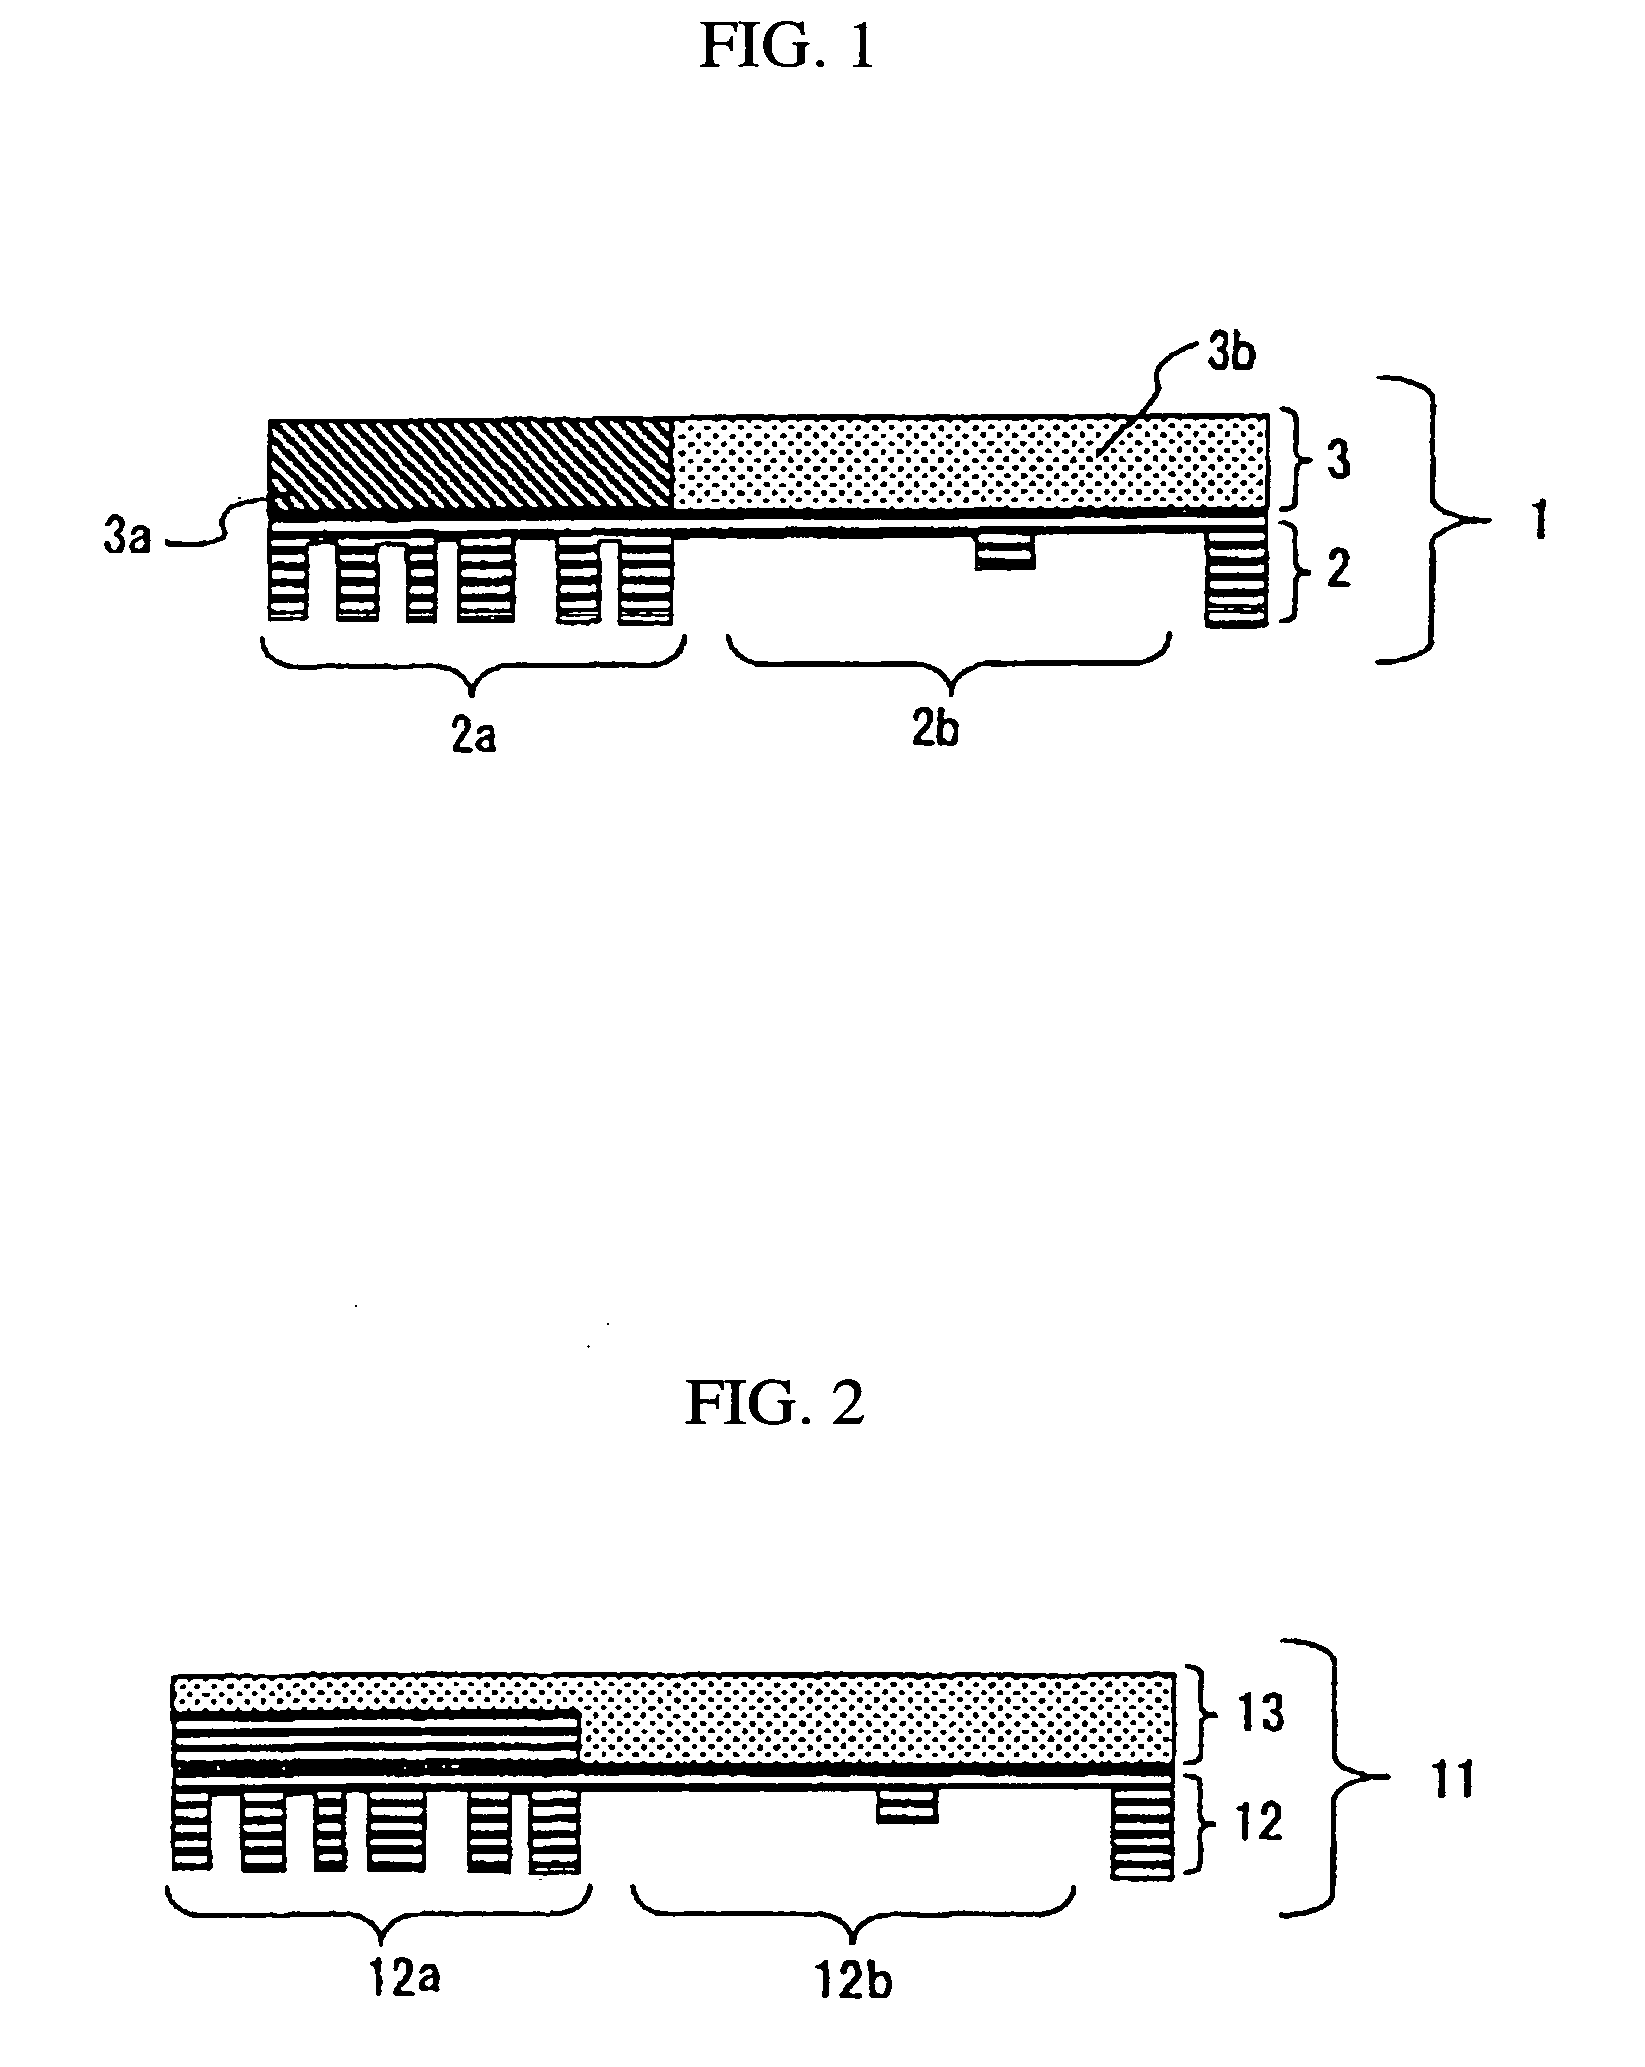 Stamper and transfer apparatus